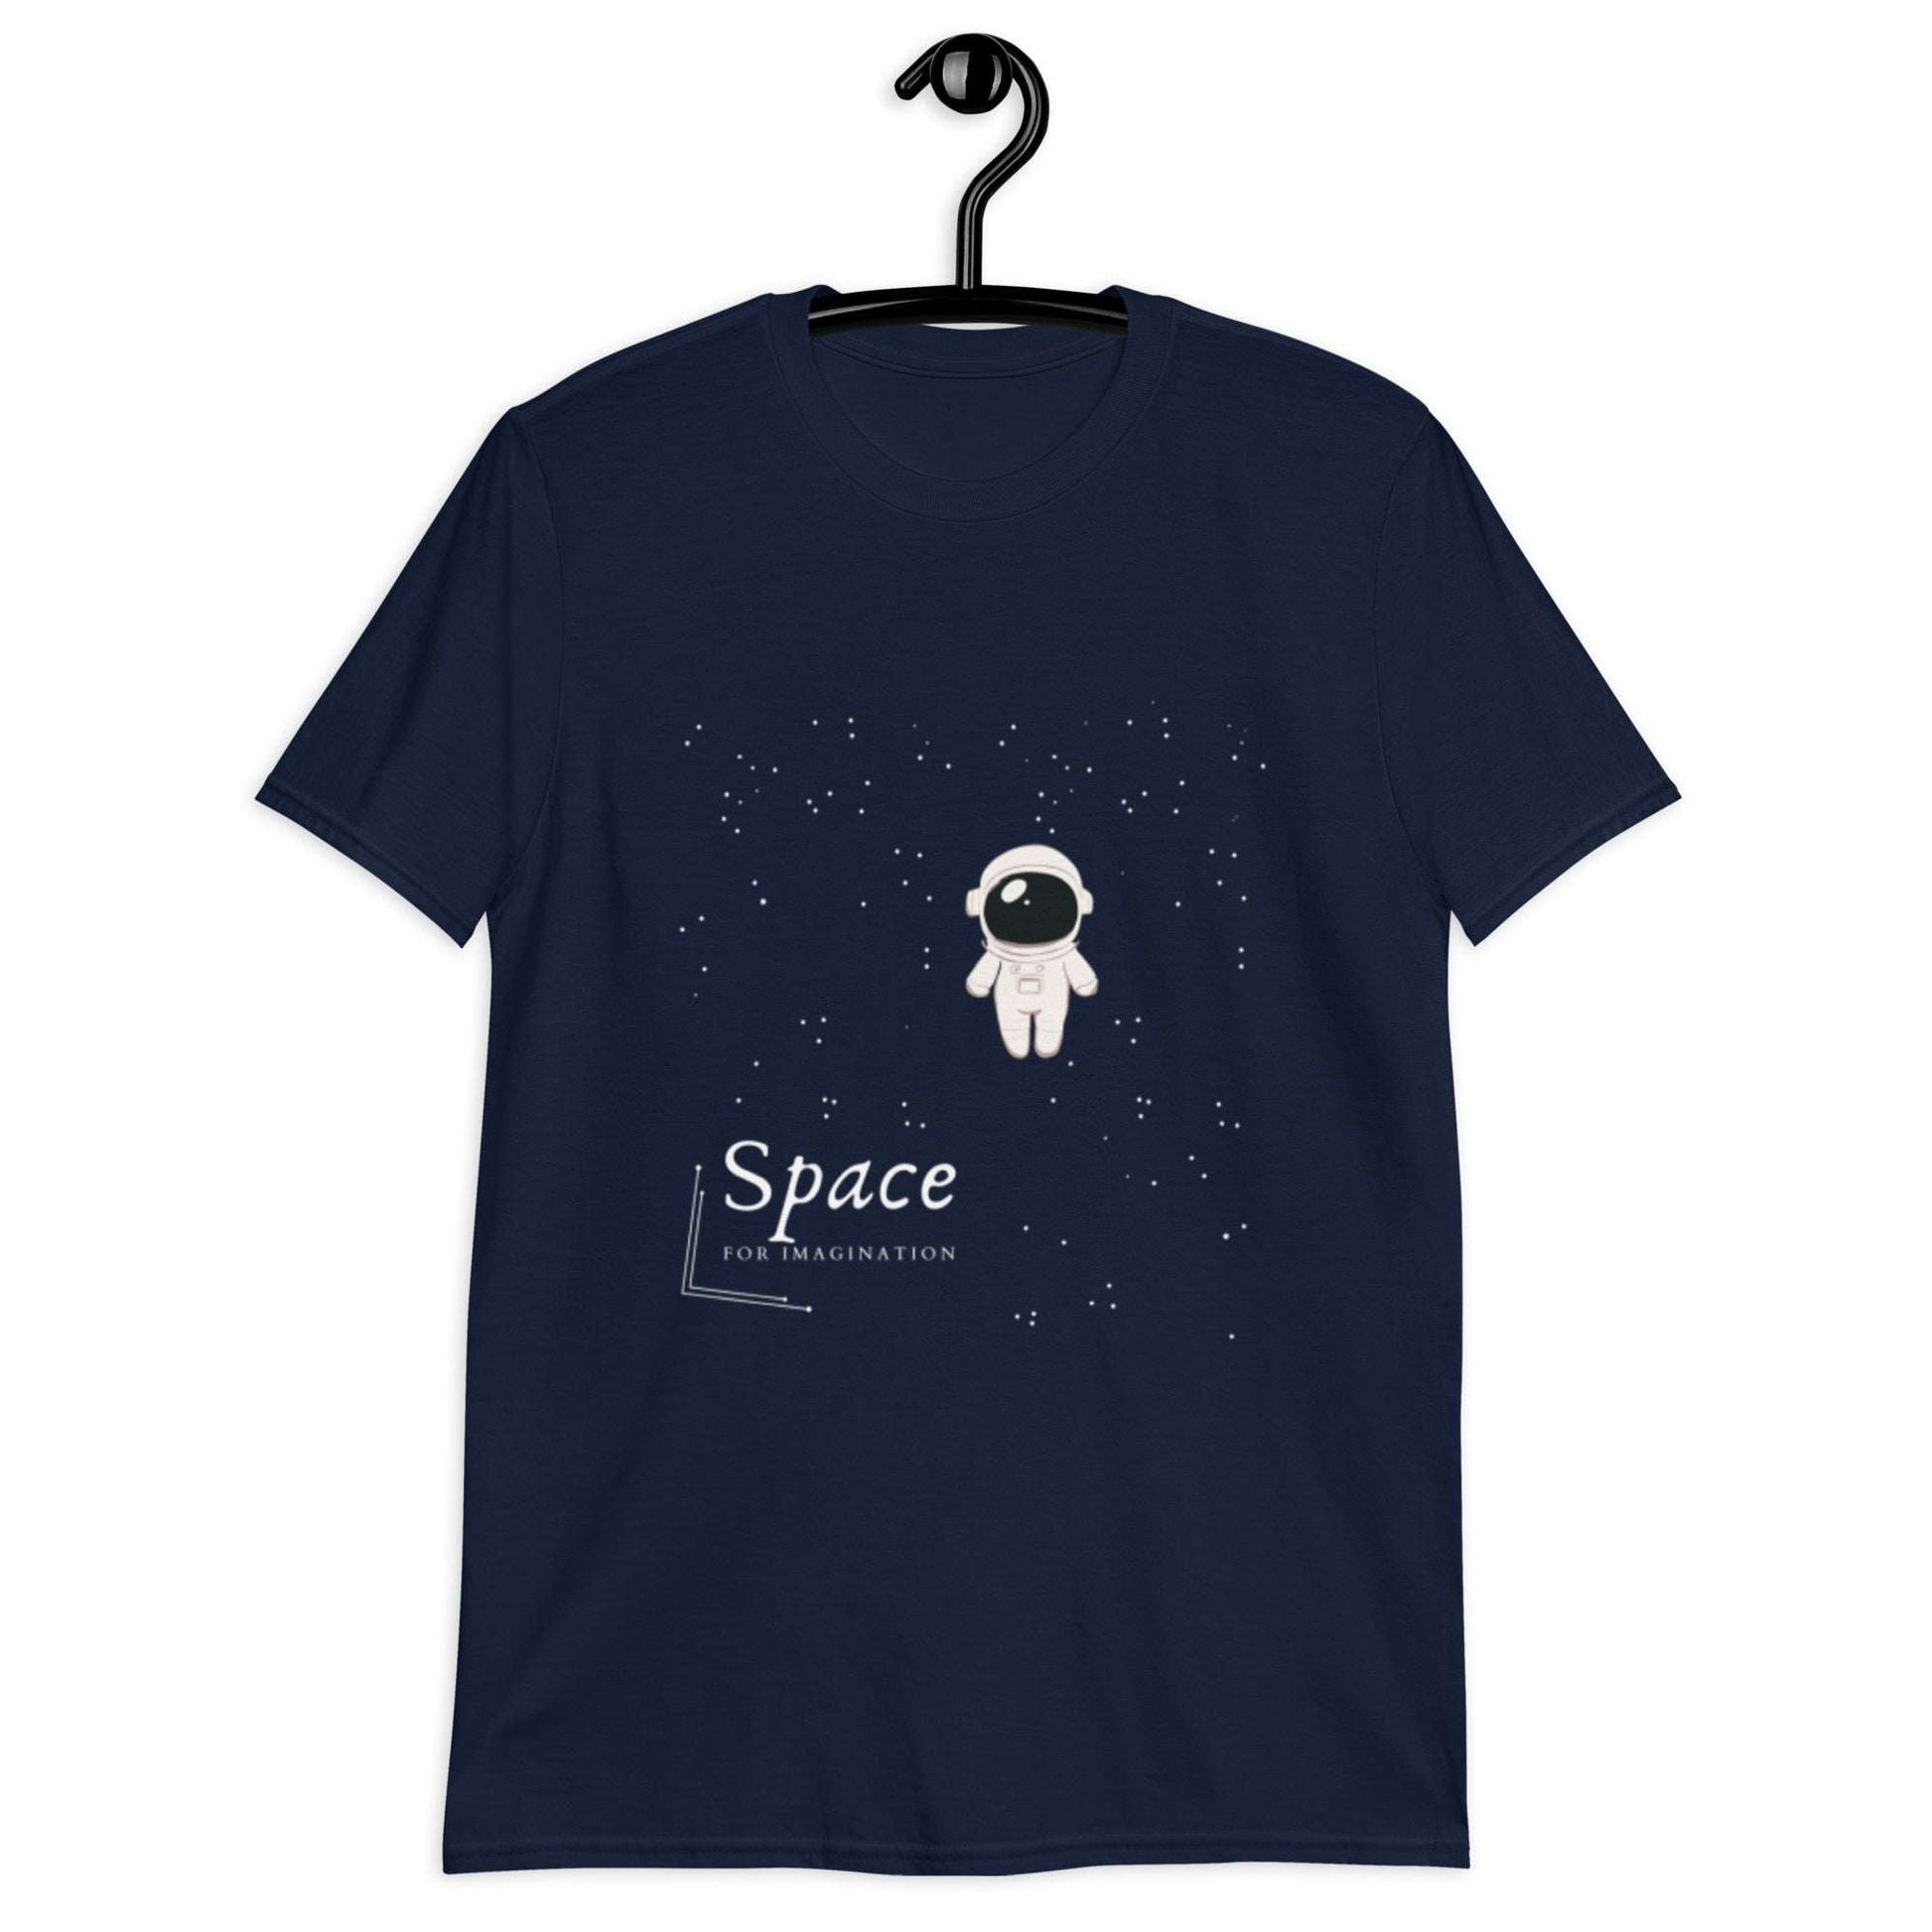 Space for Imagination, Astronaut Tee